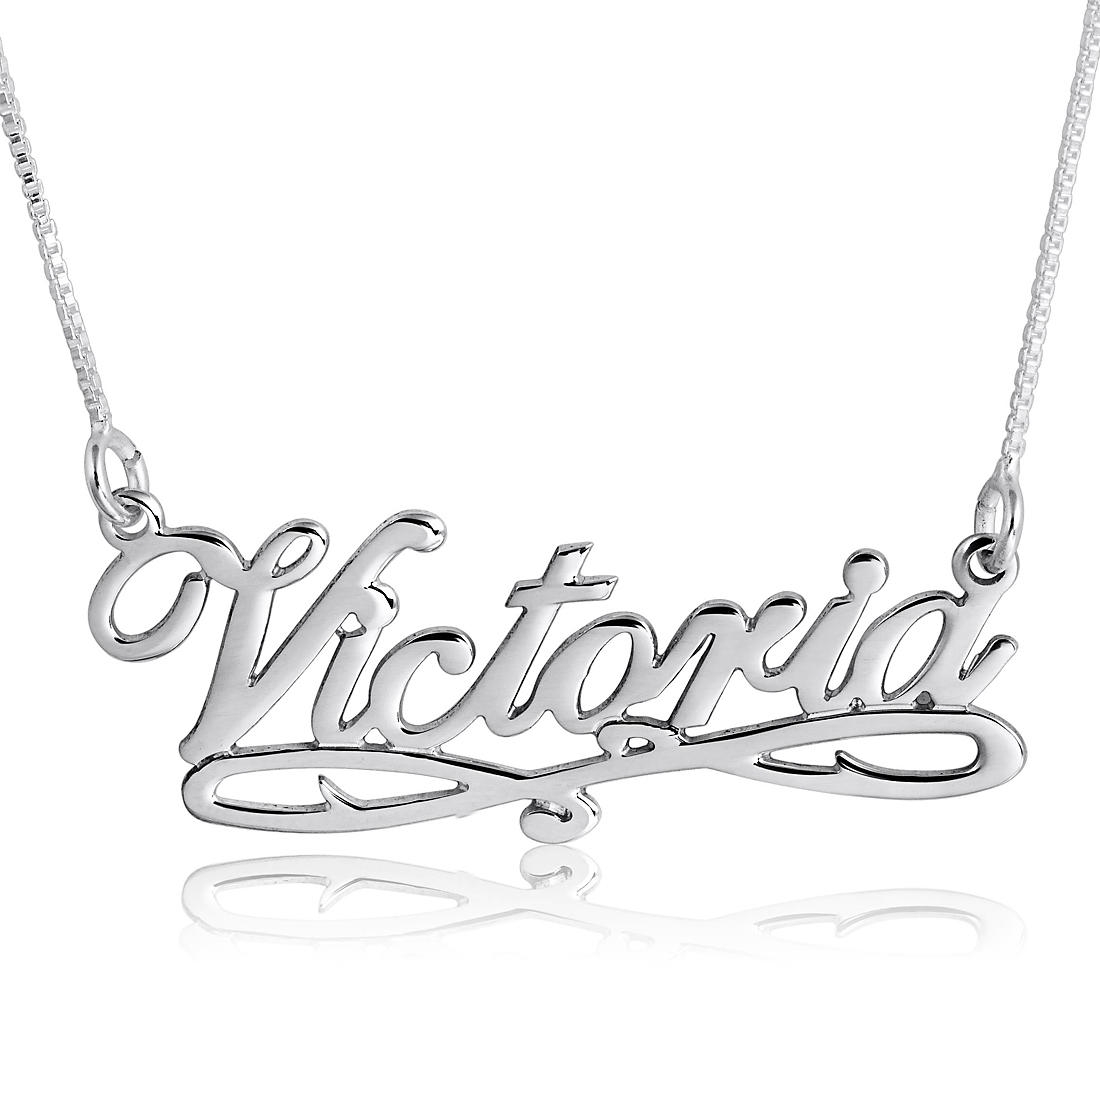 14K White Gold Delicate Calligraphy Name Necklace - 1